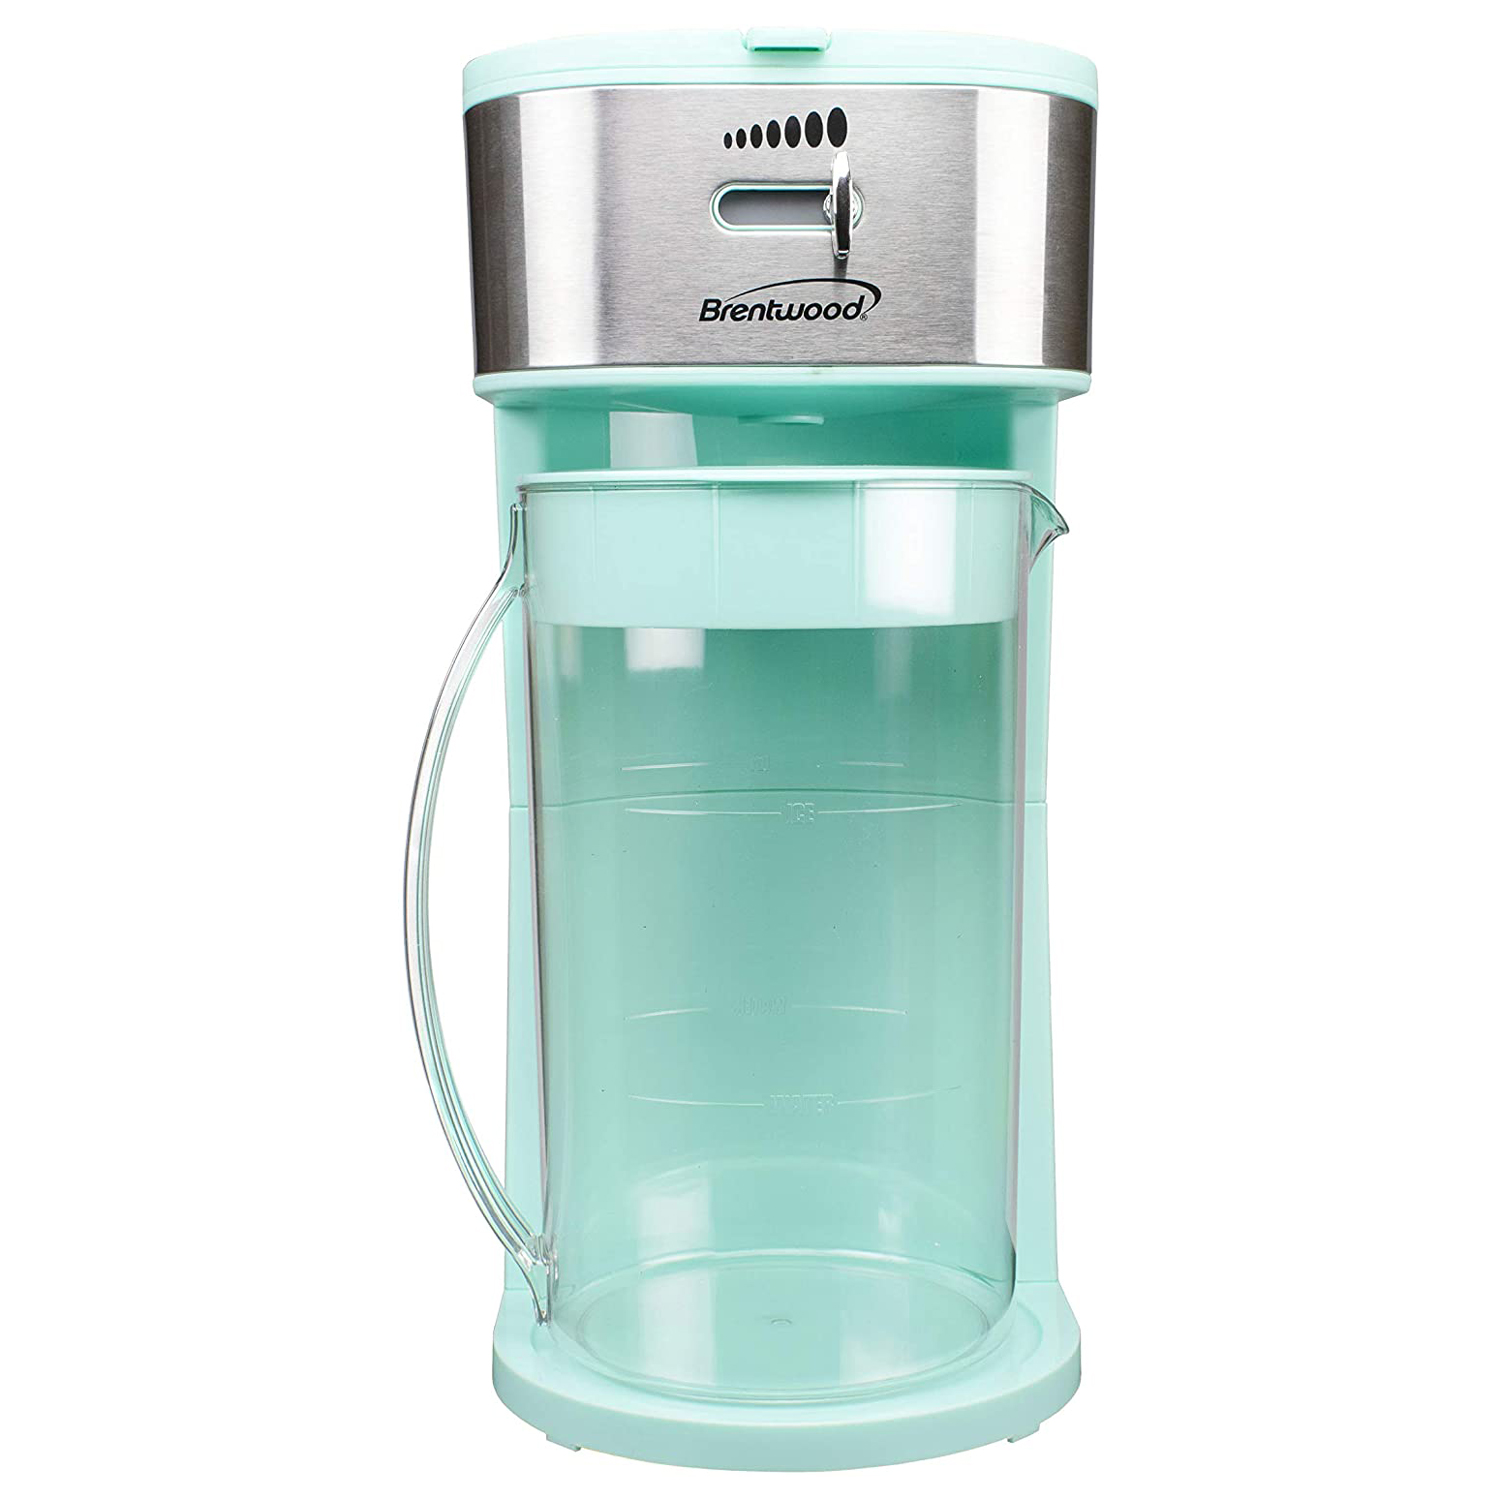 Brentwood KT-2150BL Coffee and Iced Tea Brewer with 64-Ounce Carafe, Blue C-4 - image 4 of 8